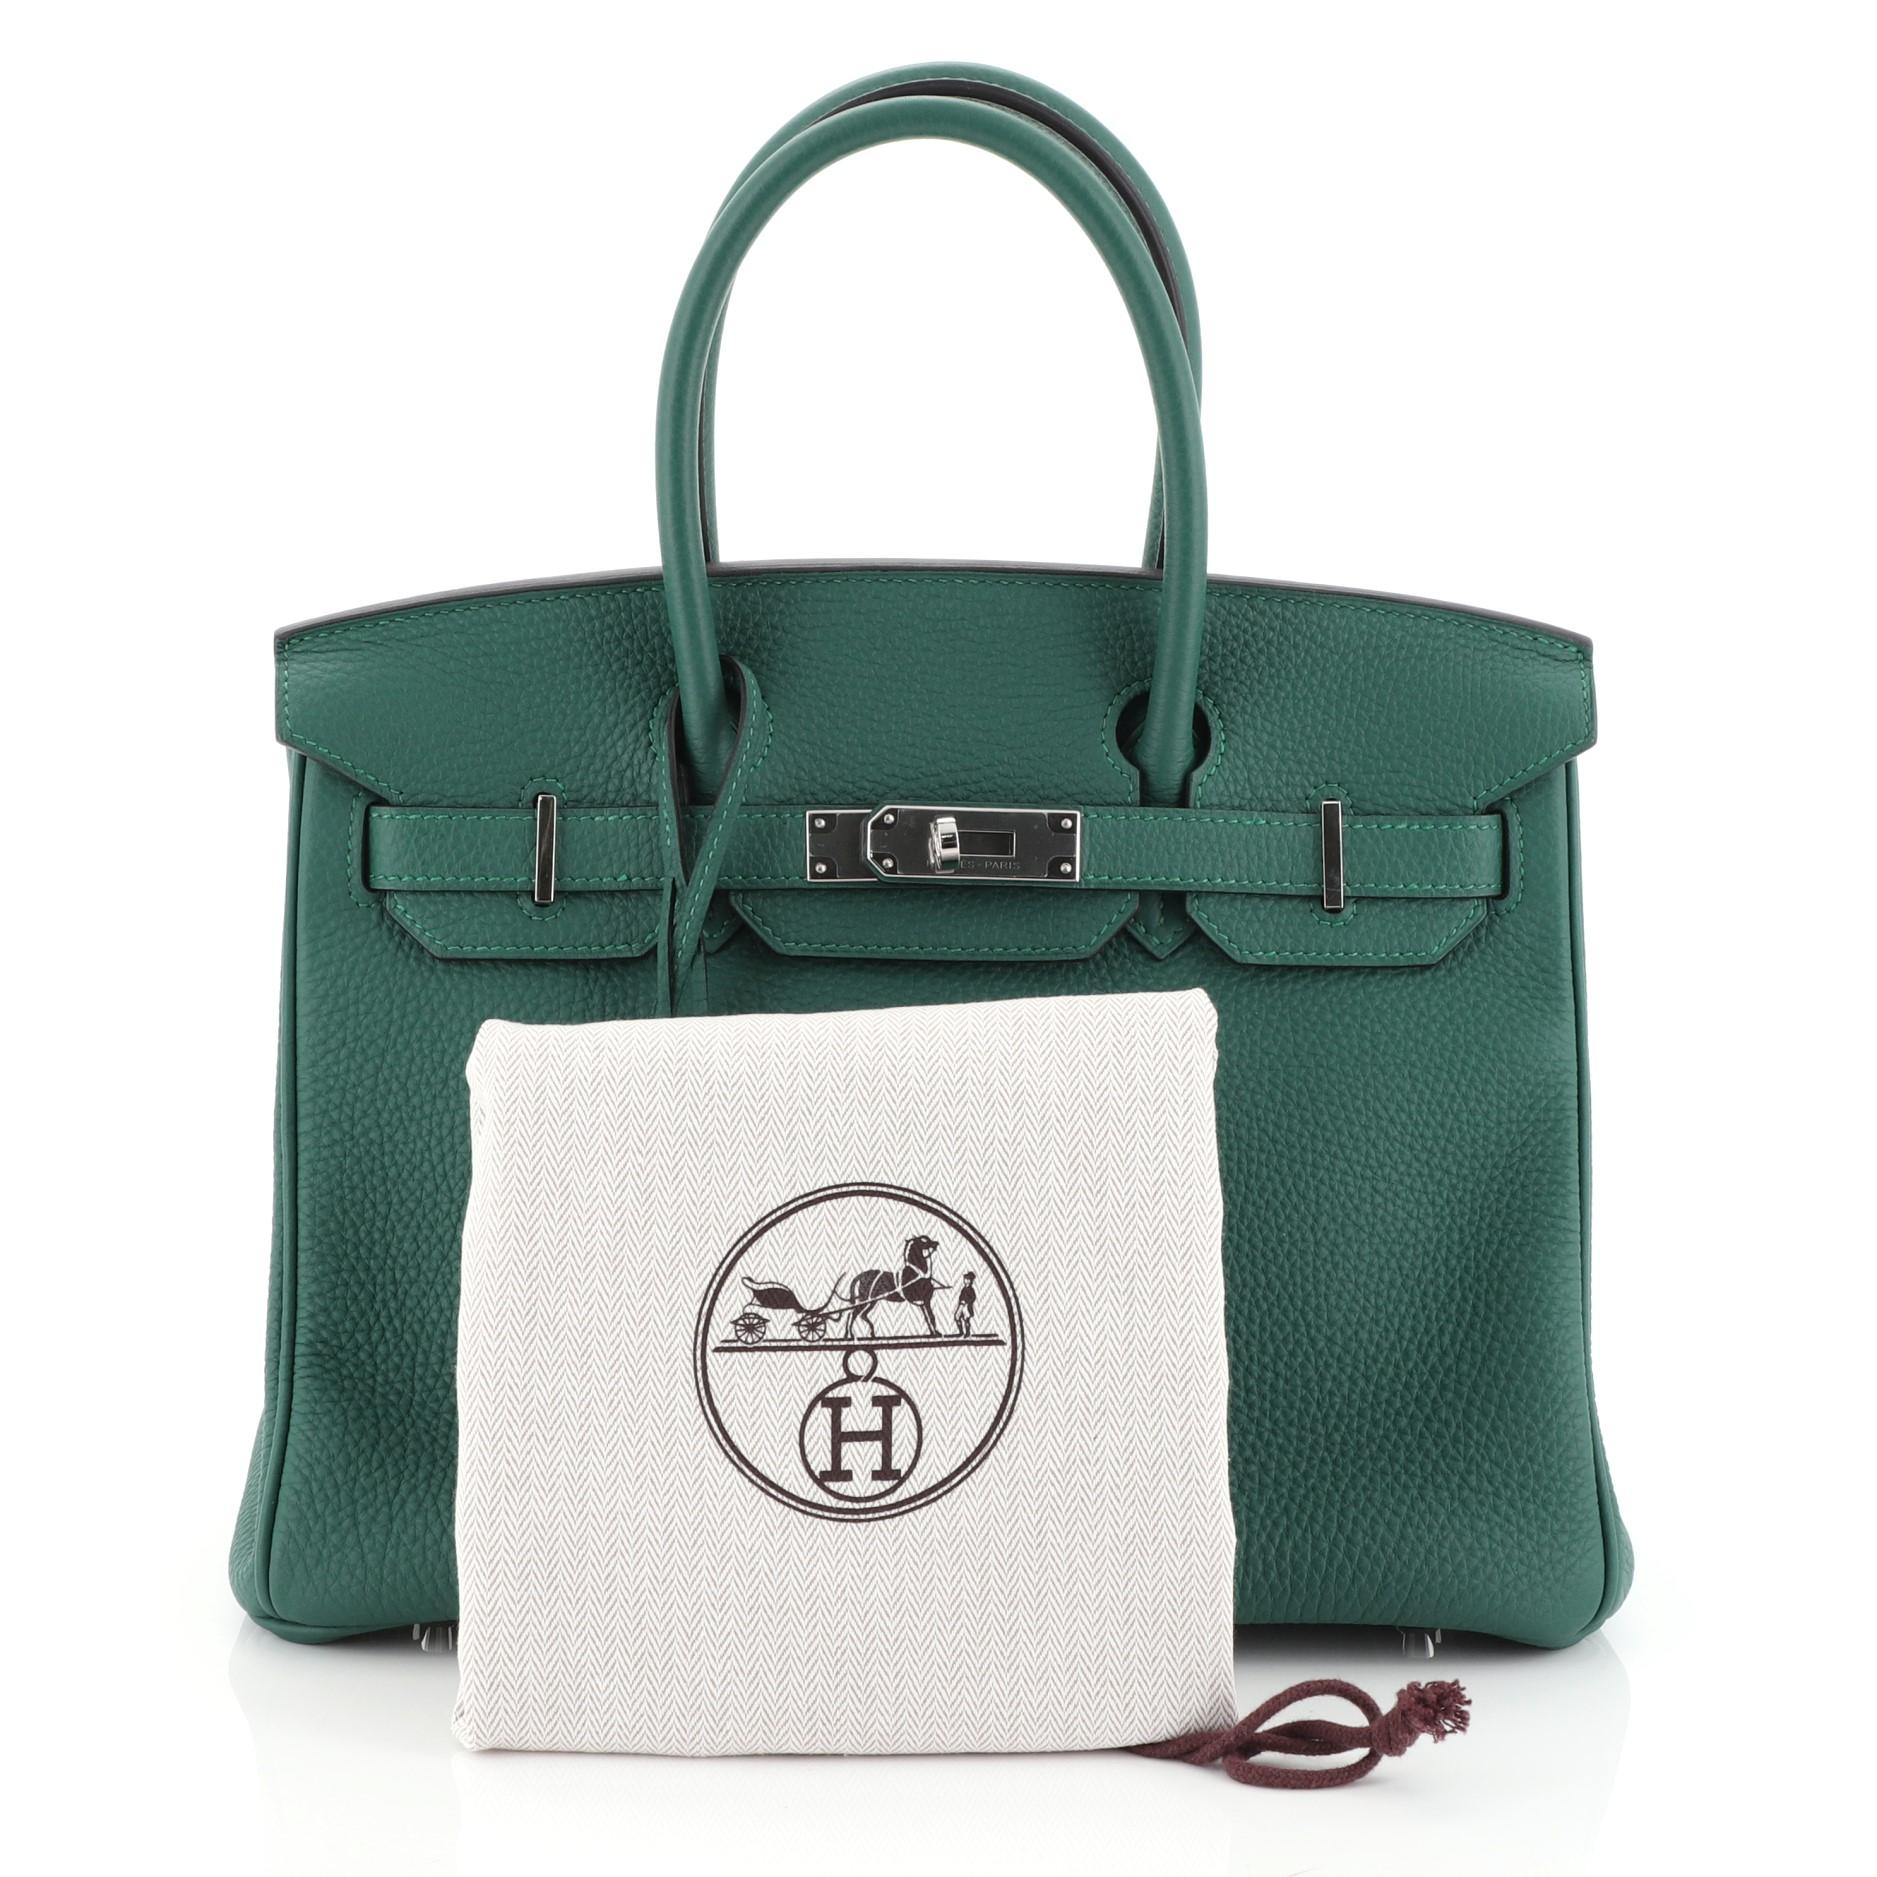 This Hermes Birkin Handbag Malachite Togo with Palladium Hardware 30, crafted in Malachite green Togo leather, features dual rolled handles, frontal flap, and palladium hardware. Its turn-lock closure opens to a Malachite green Chevre leather